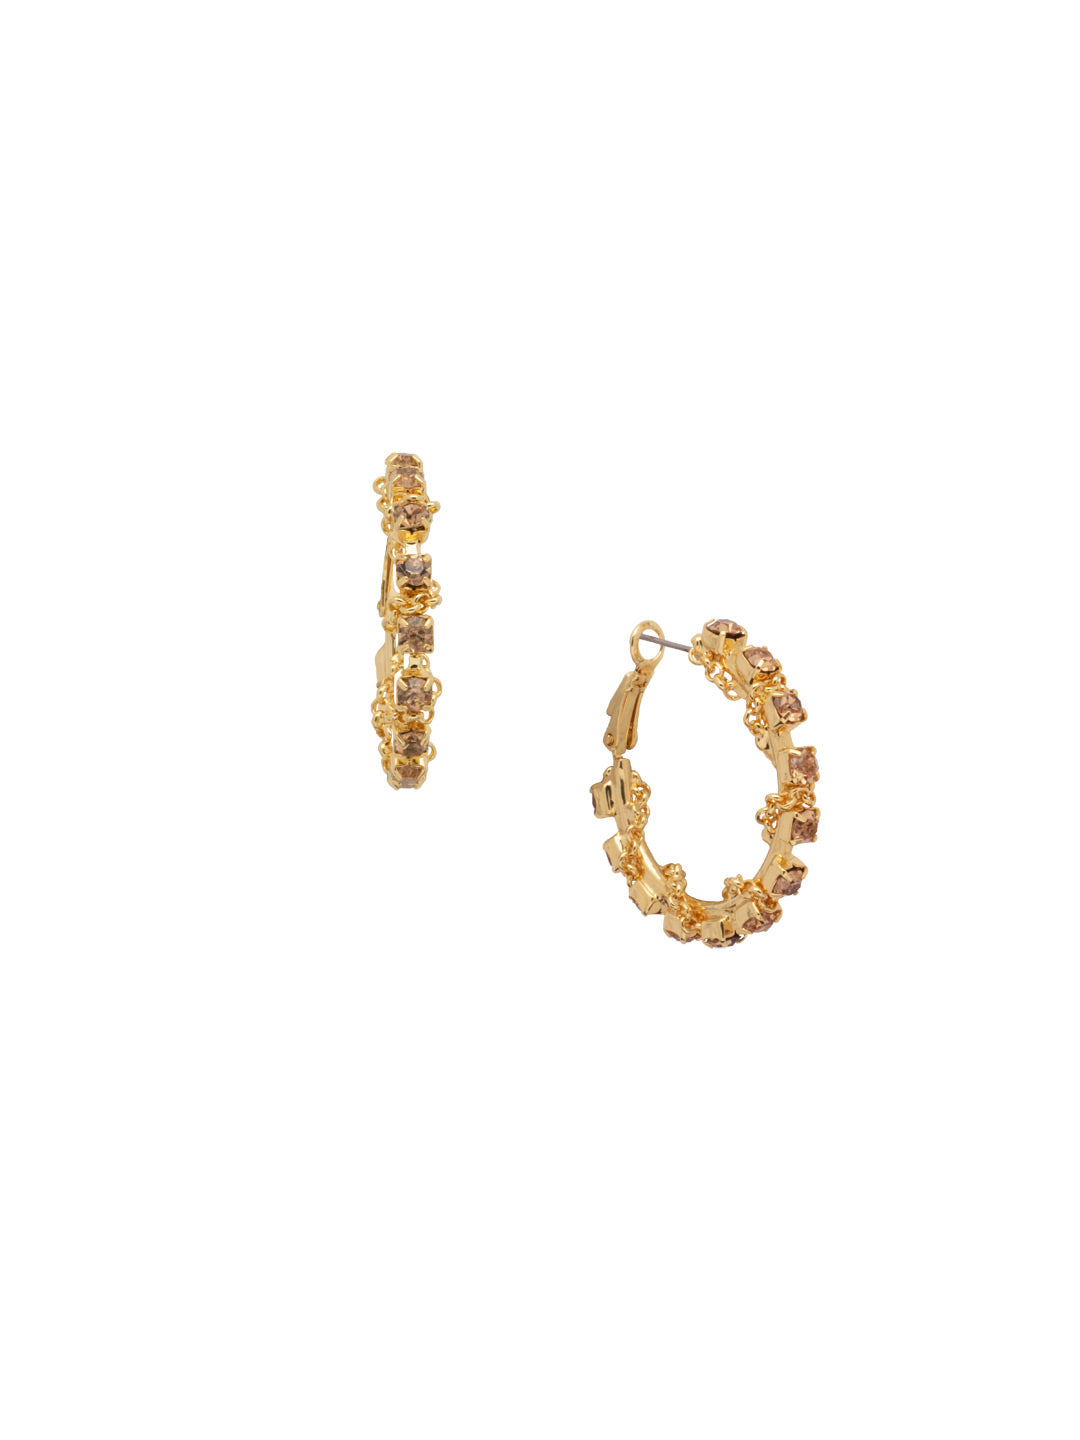 Brandi Classic Hoop Earring - EFC63BGRSU - <p>The Brandi Classic Hoop Earrings feature heavier classic crystals on a hoop, elevated with a braided chain design. From Sorrelli's Raw Sugar collection in our Bright Gold-tone finish.</p>